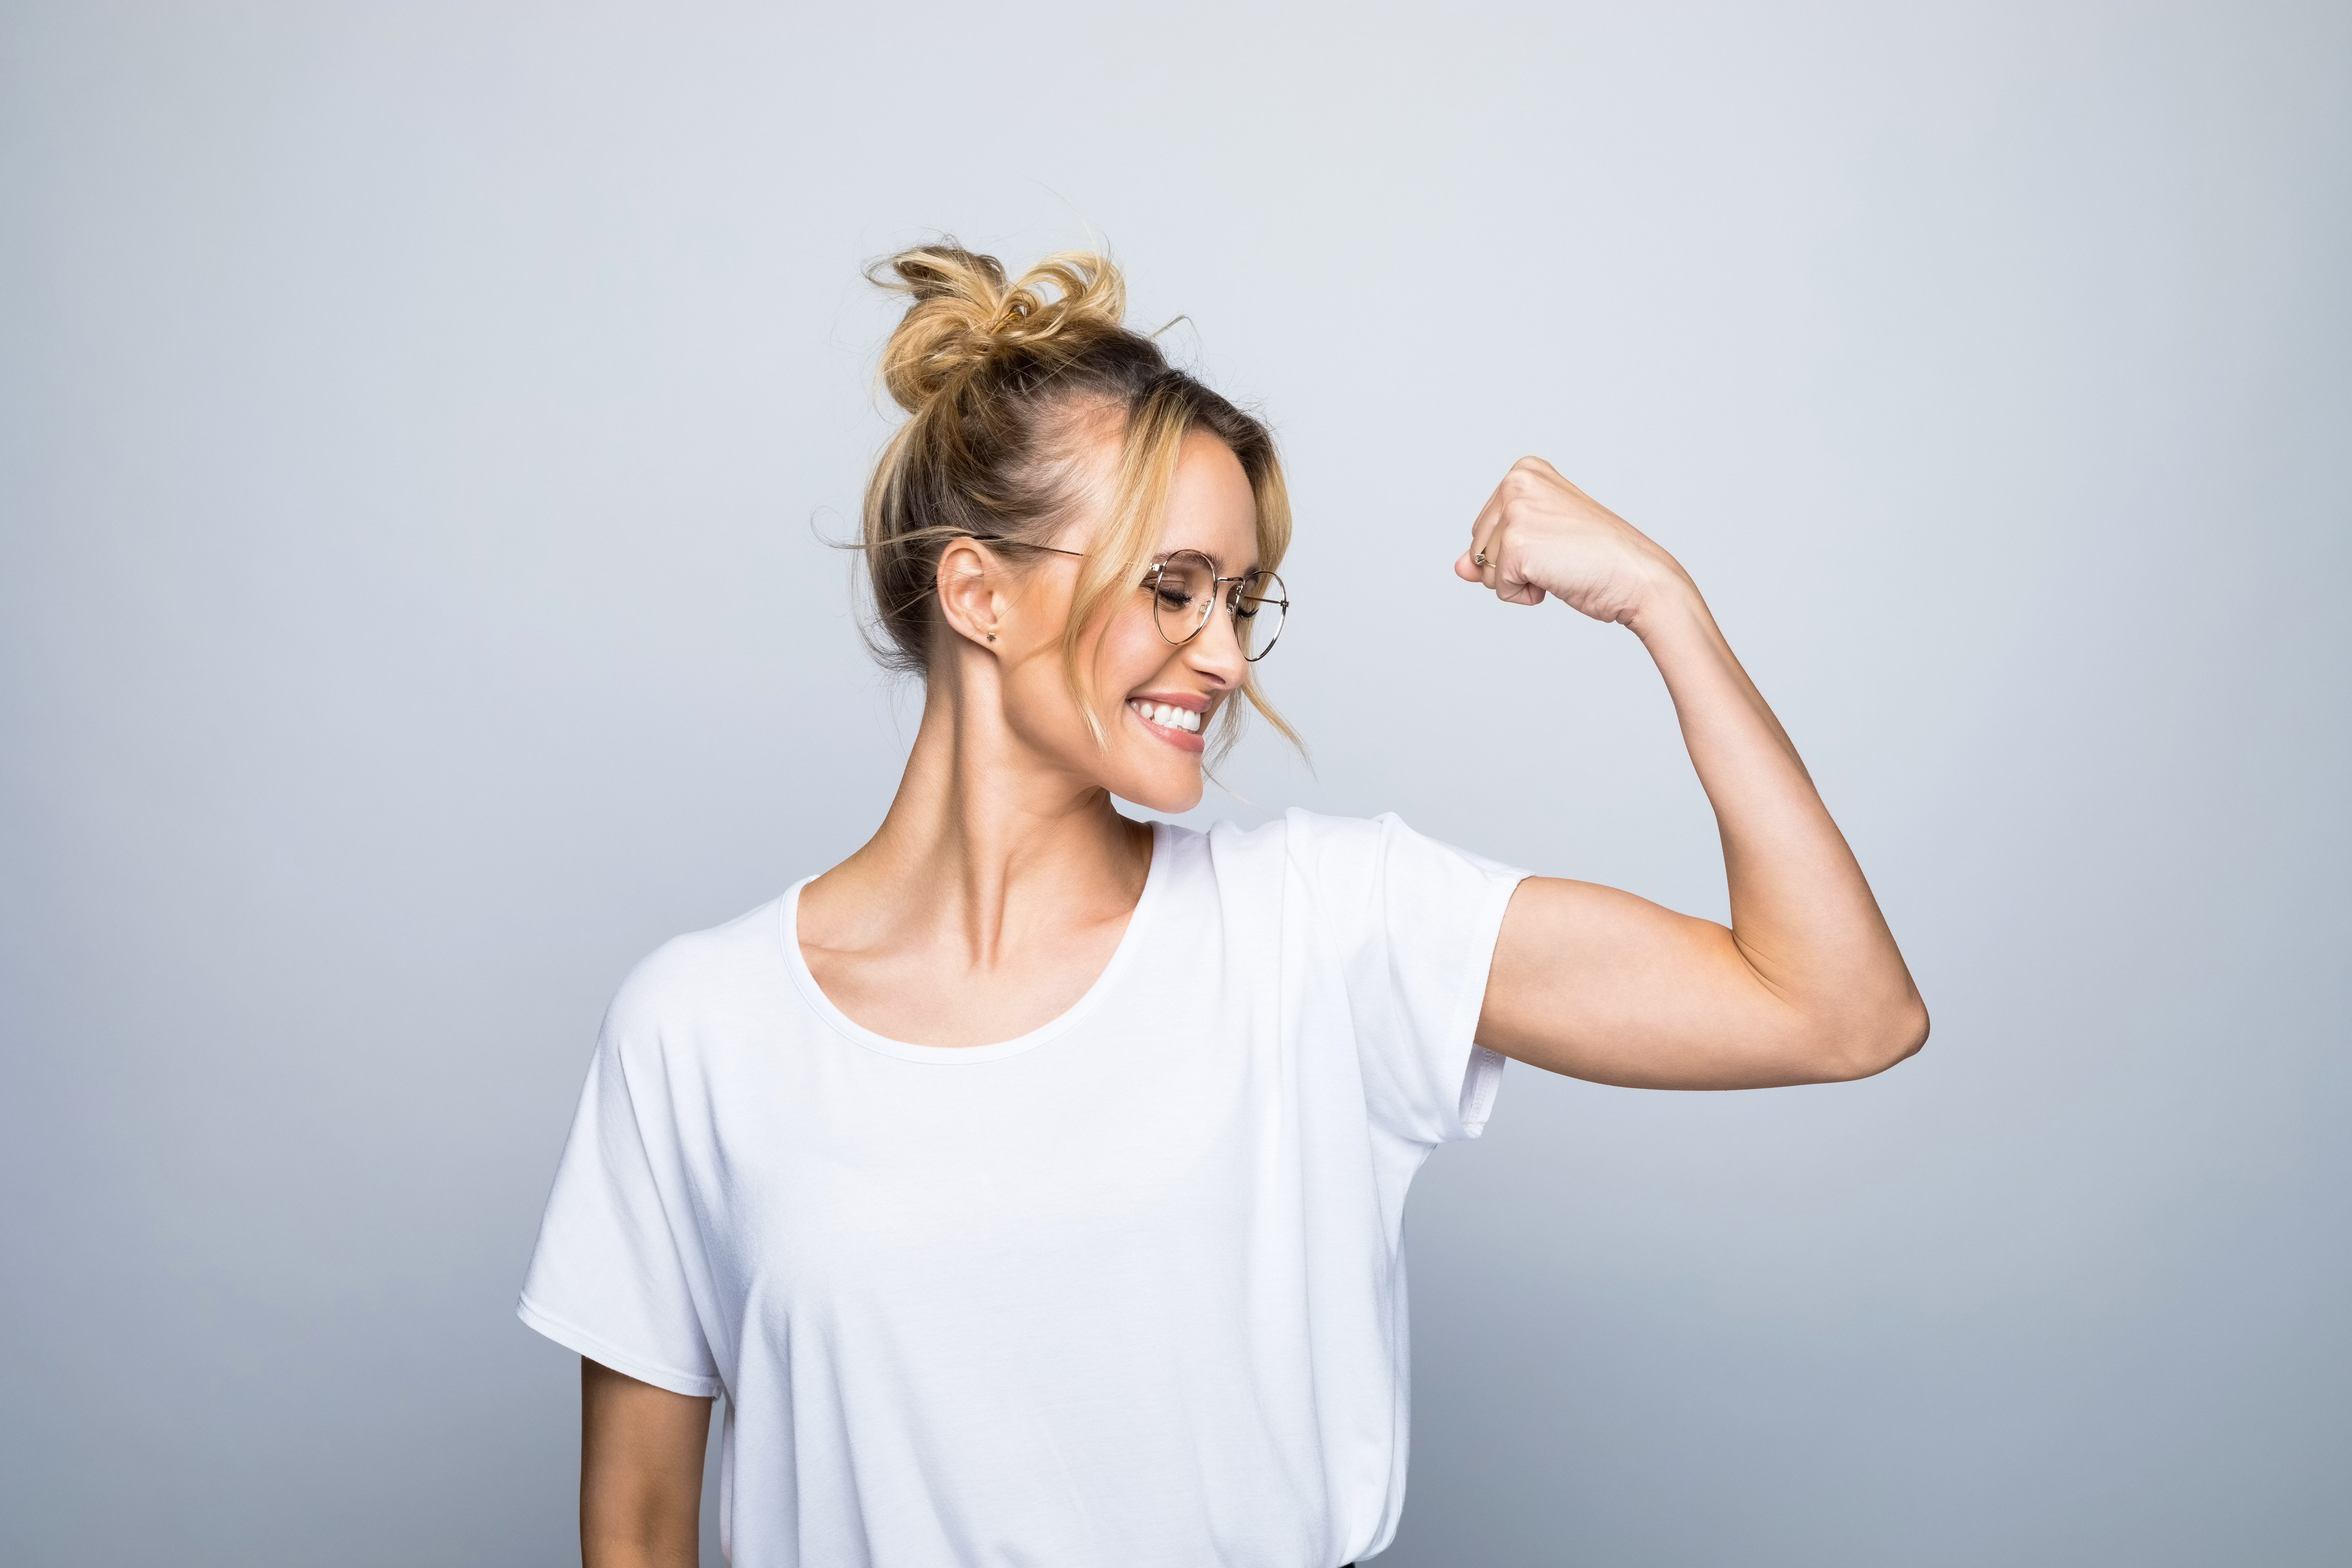 Happy beautiful woman flexing muscle | Source: Getty Images